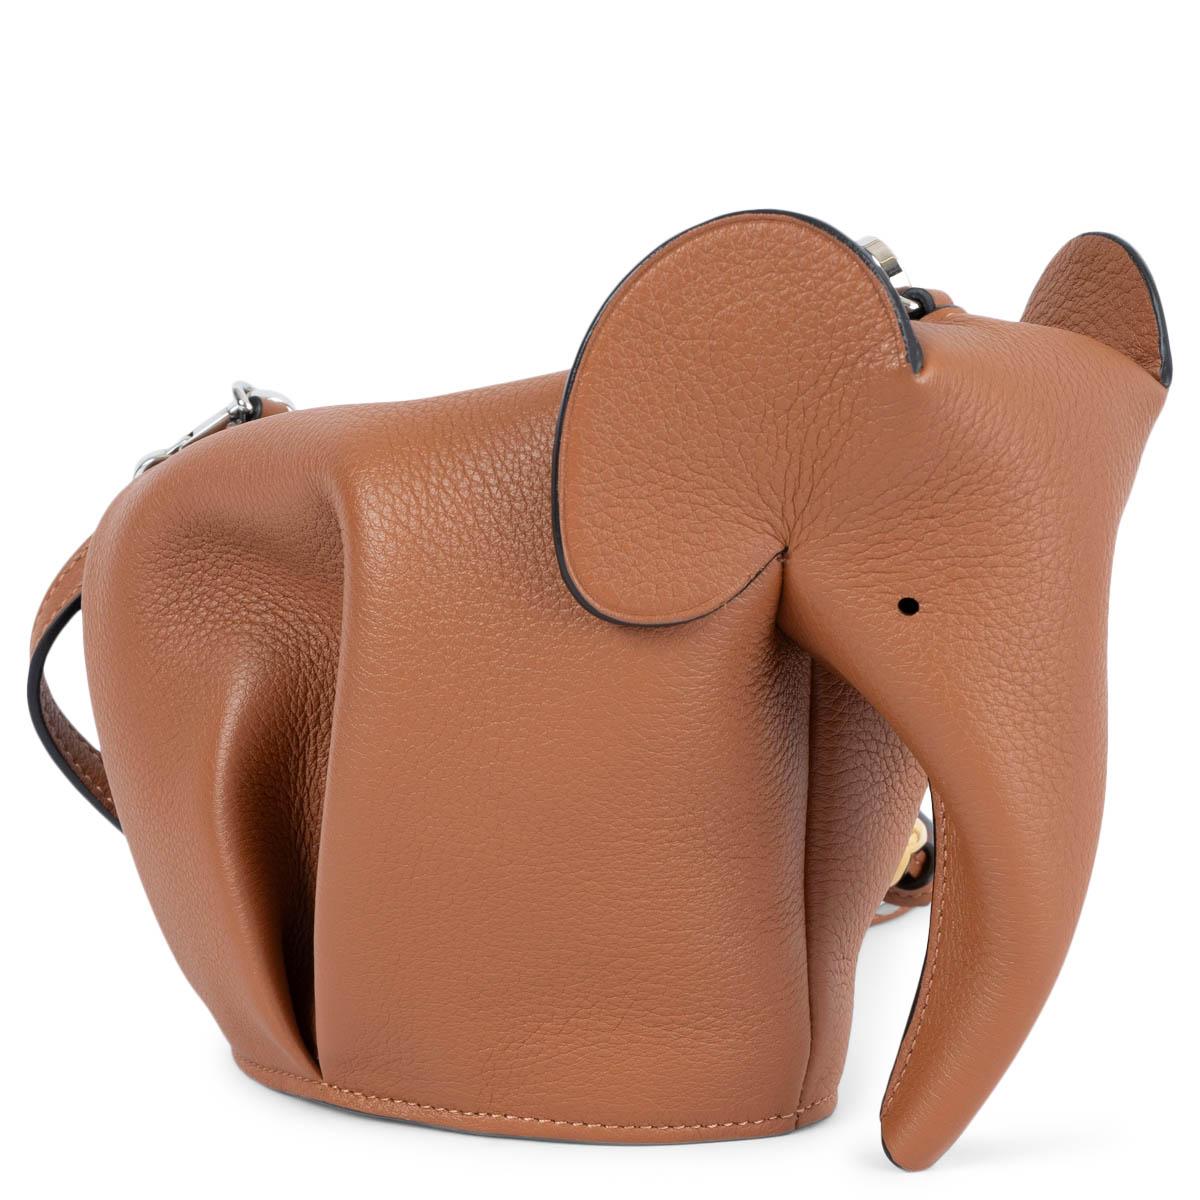 100% authentic Loewe Elephant Mini crossbody bag in tan calfskin. The design features cute gold-tone charm and a tassel on the detachable and adjustable shoulder strap. The bag opens with a zipper on top and is unlined. Has been carried once and is